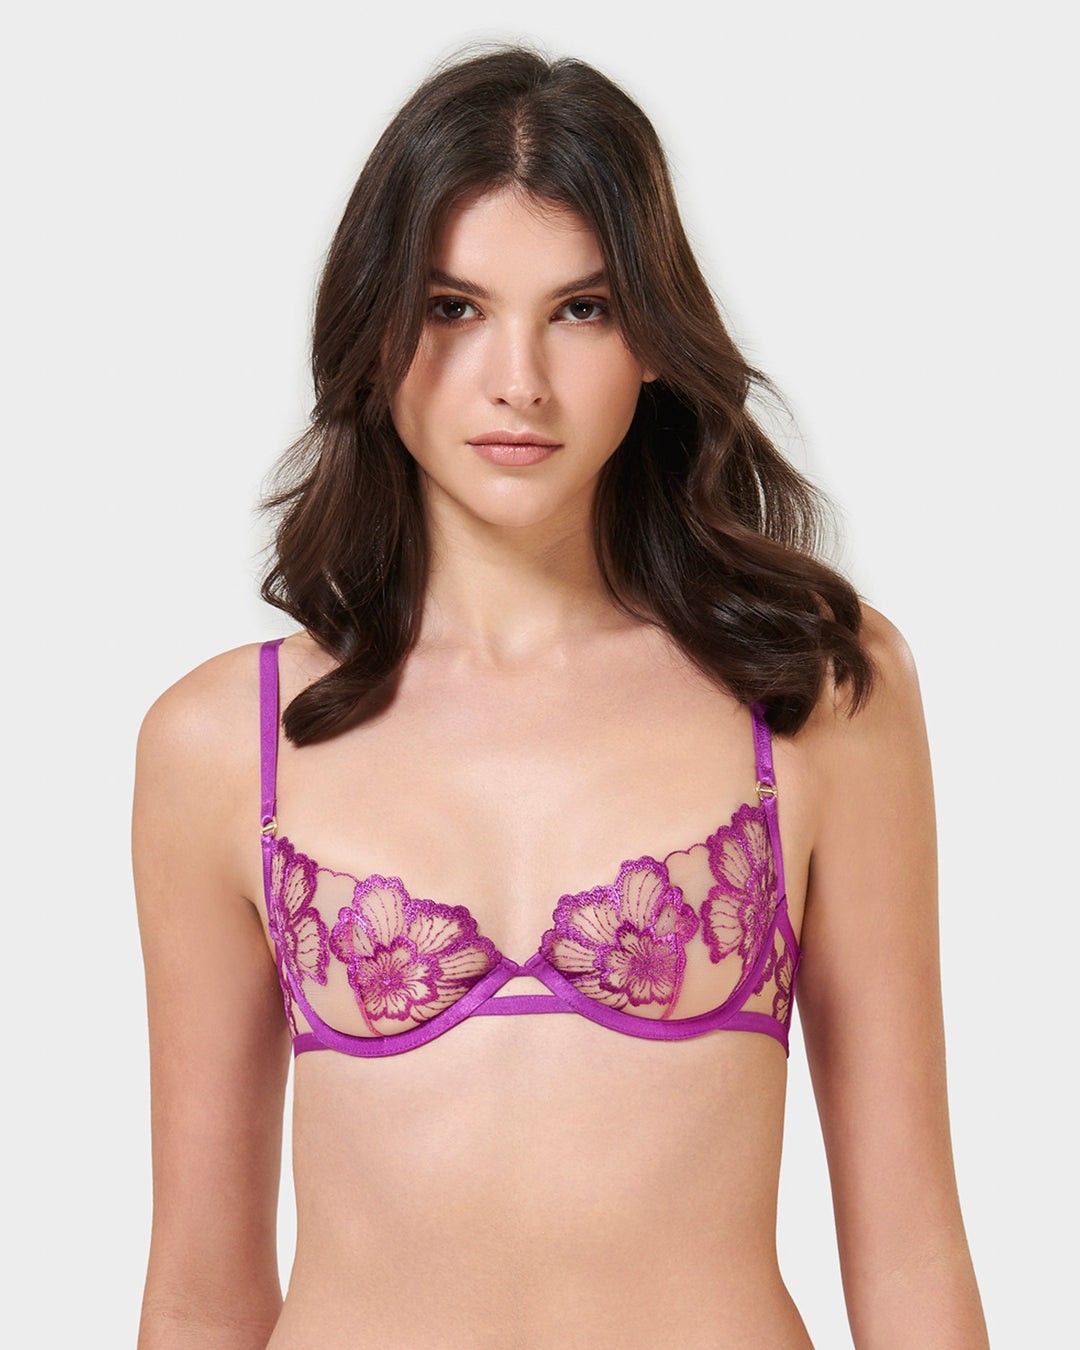 By Anthropologie Sheer Lace Underwire Bralette